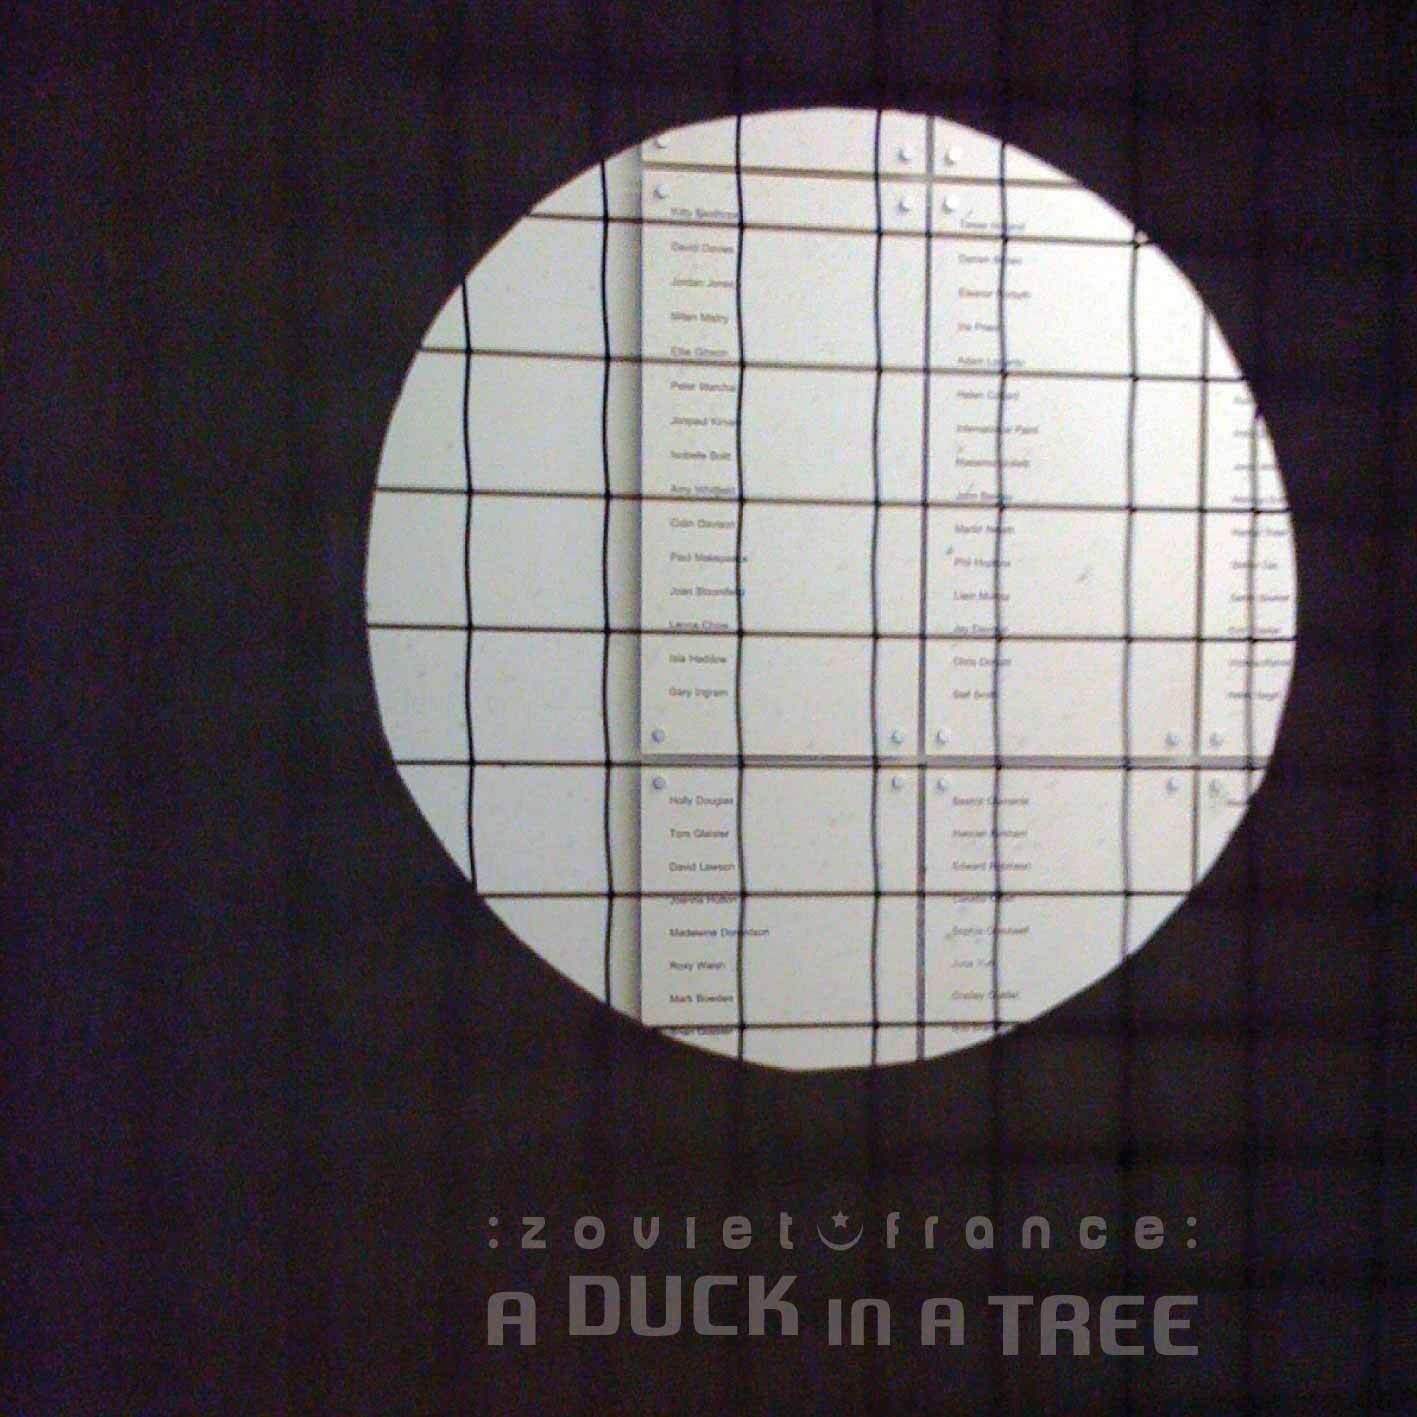 A-Duck-in-a-Tree-2014-12-27-_-A-Bit-of-a